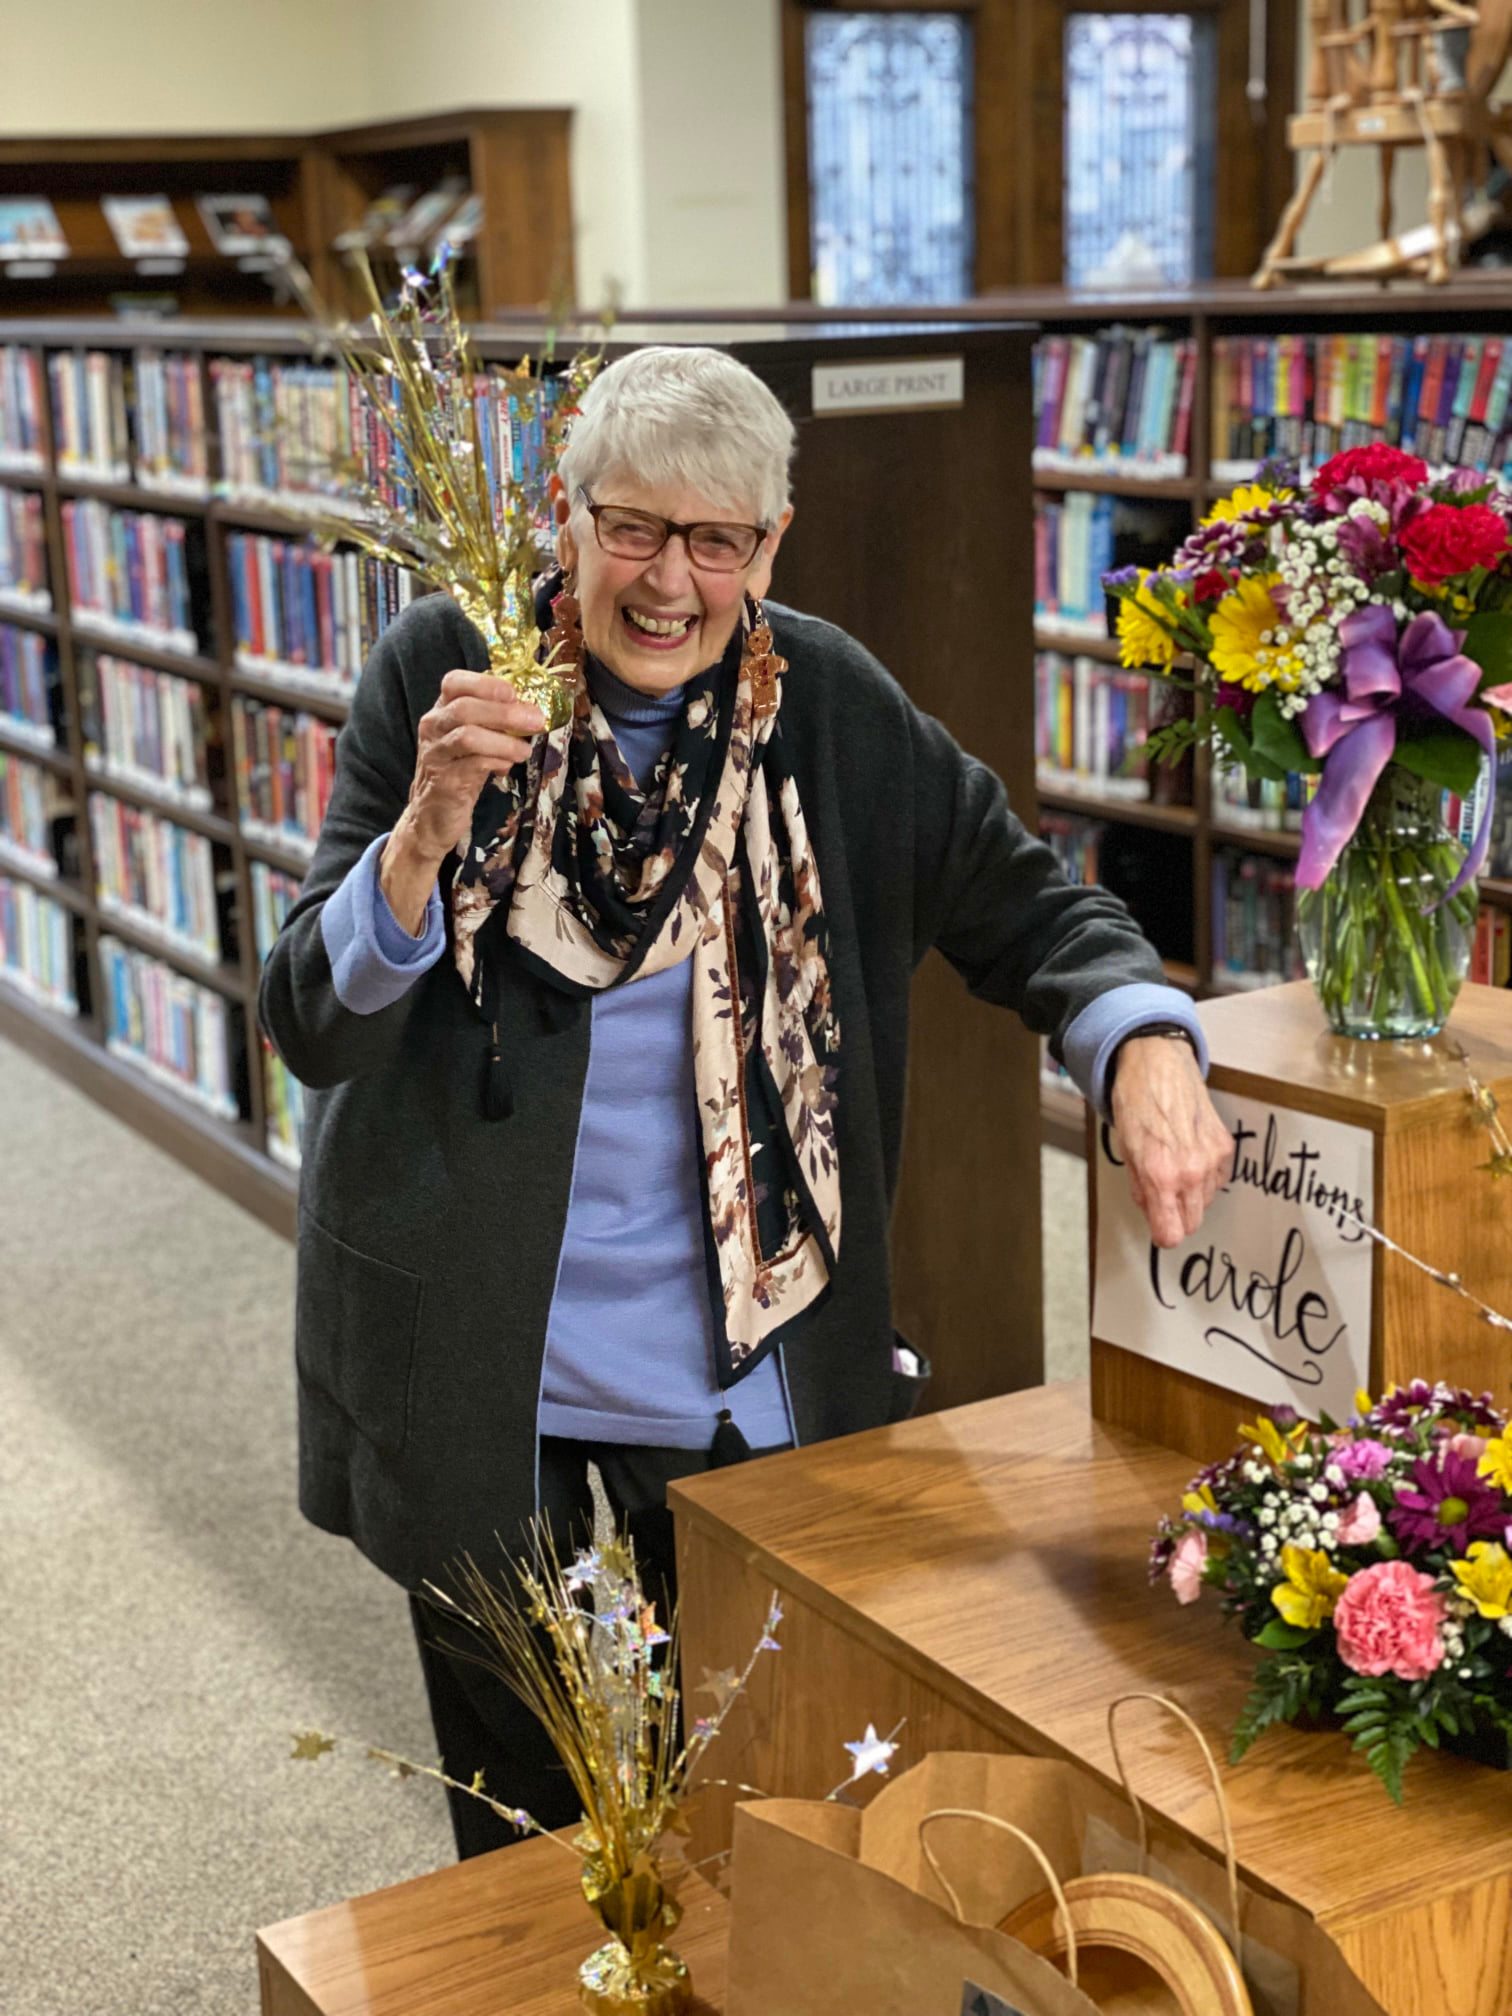 Carole Berard retirement photo. Carole is holding gold sparkle decoration and smilinf in the libary, with her left arm leaning on a display table w a sign that reads 'congratulations carole'.